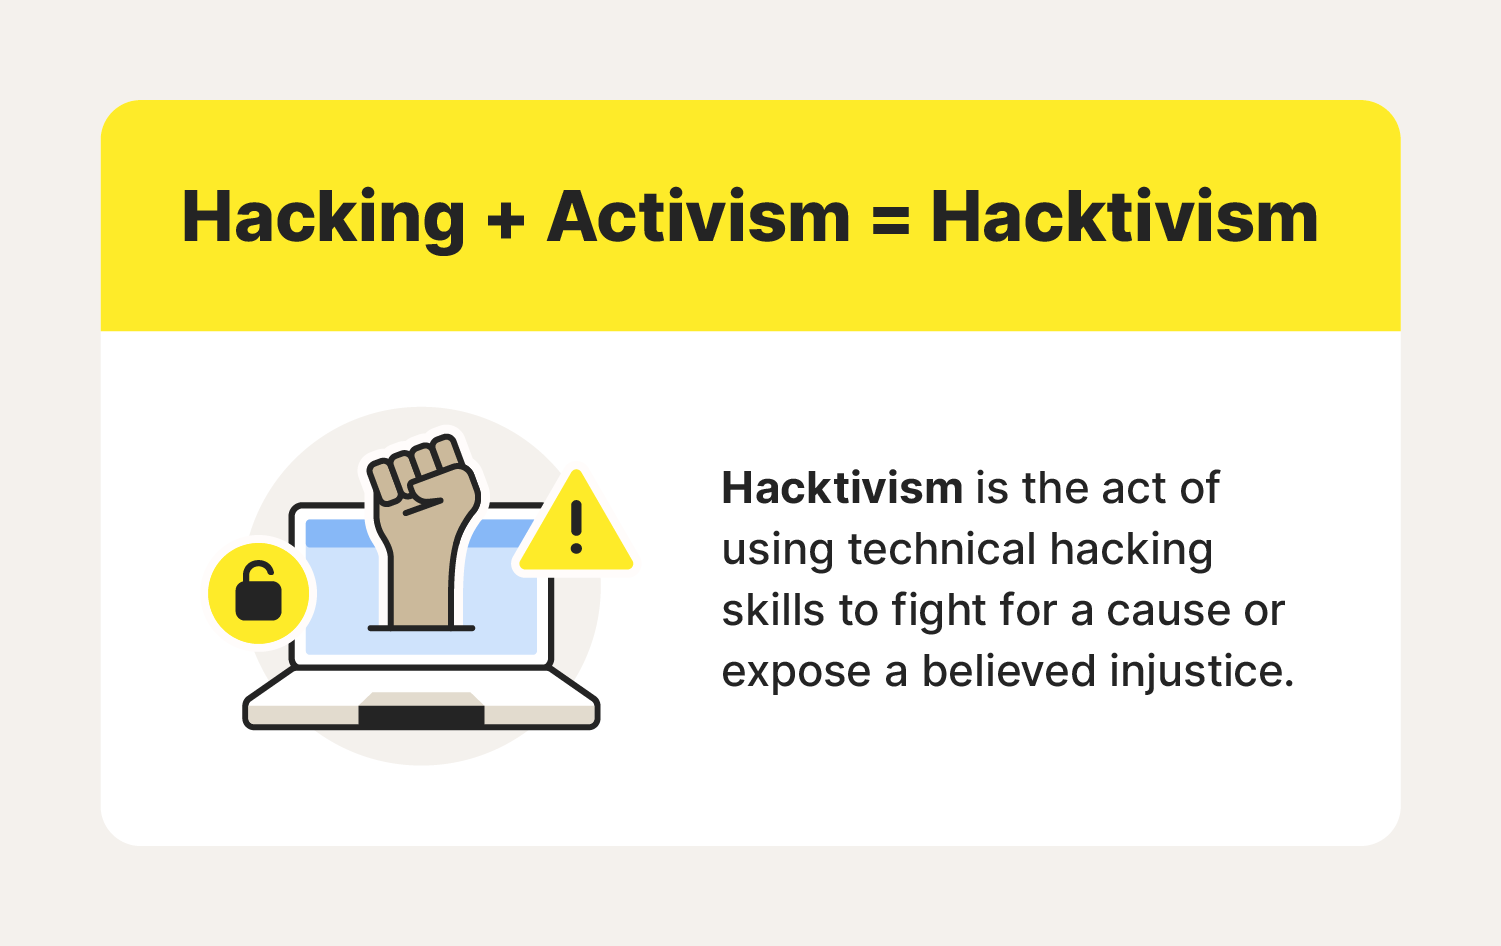 A graphic details what hacktivism is.